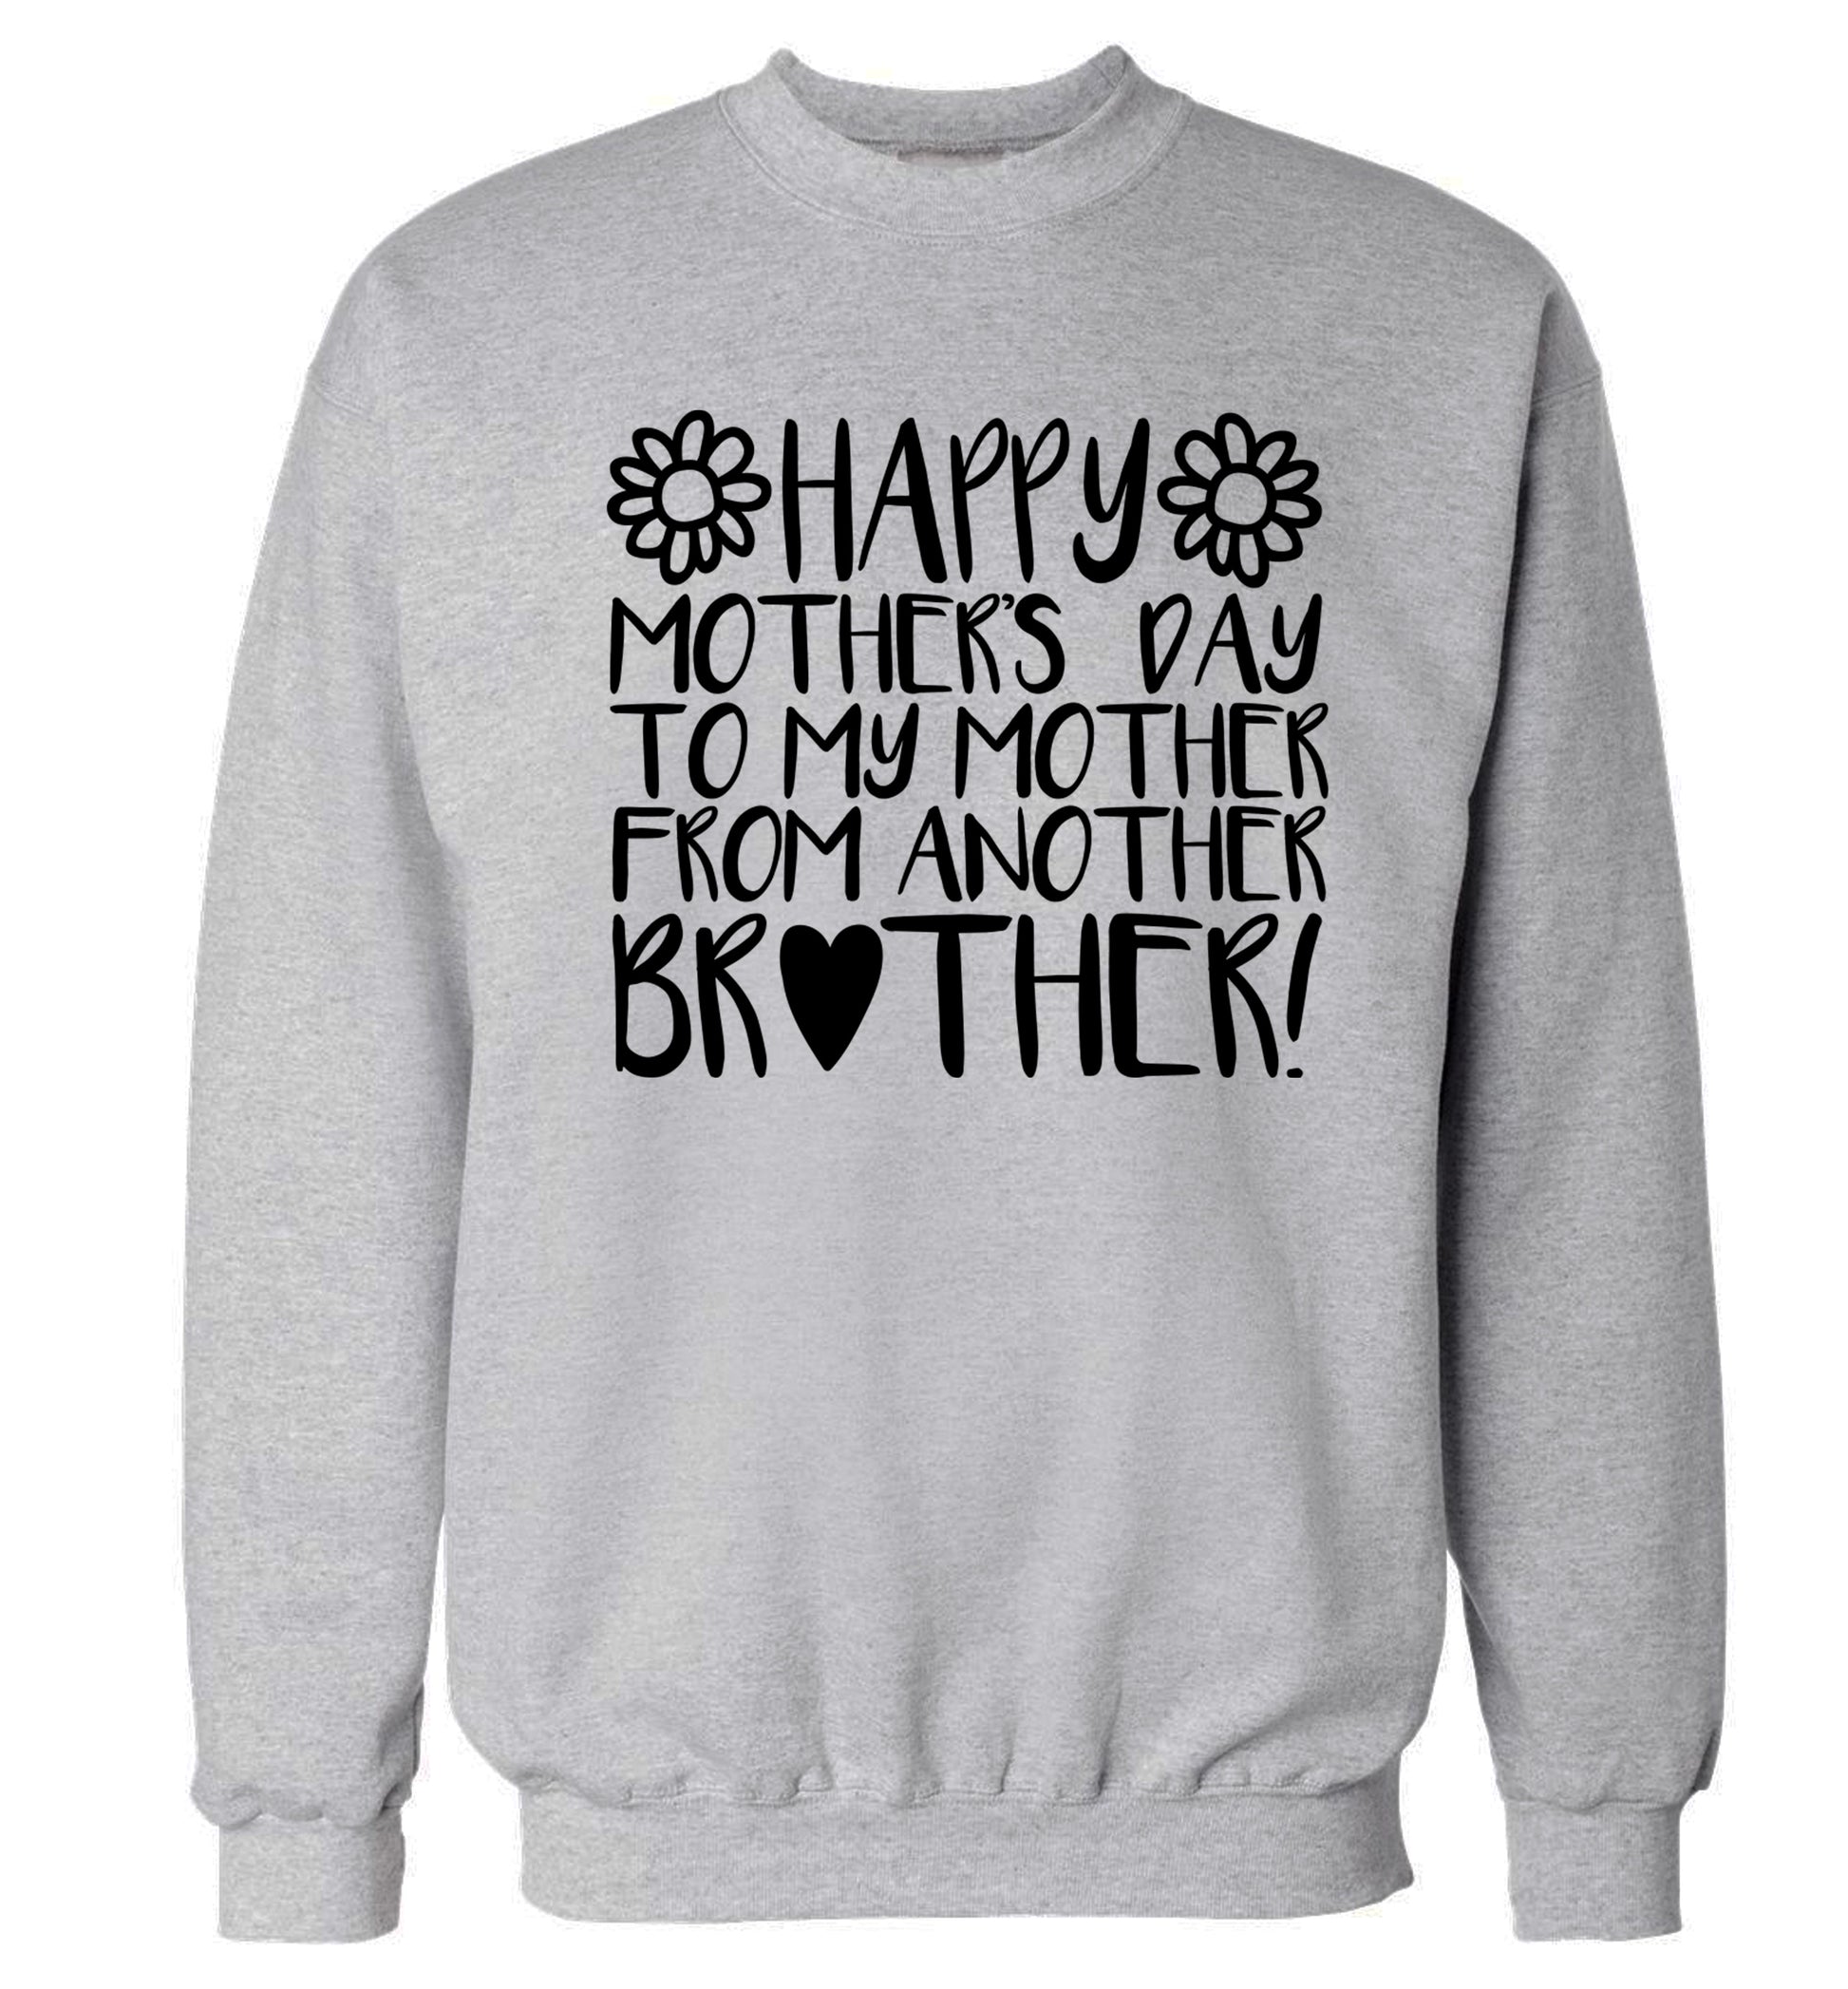 Happy mother's day to my mother from another brother Adult's unisex grey Sweater 2XL